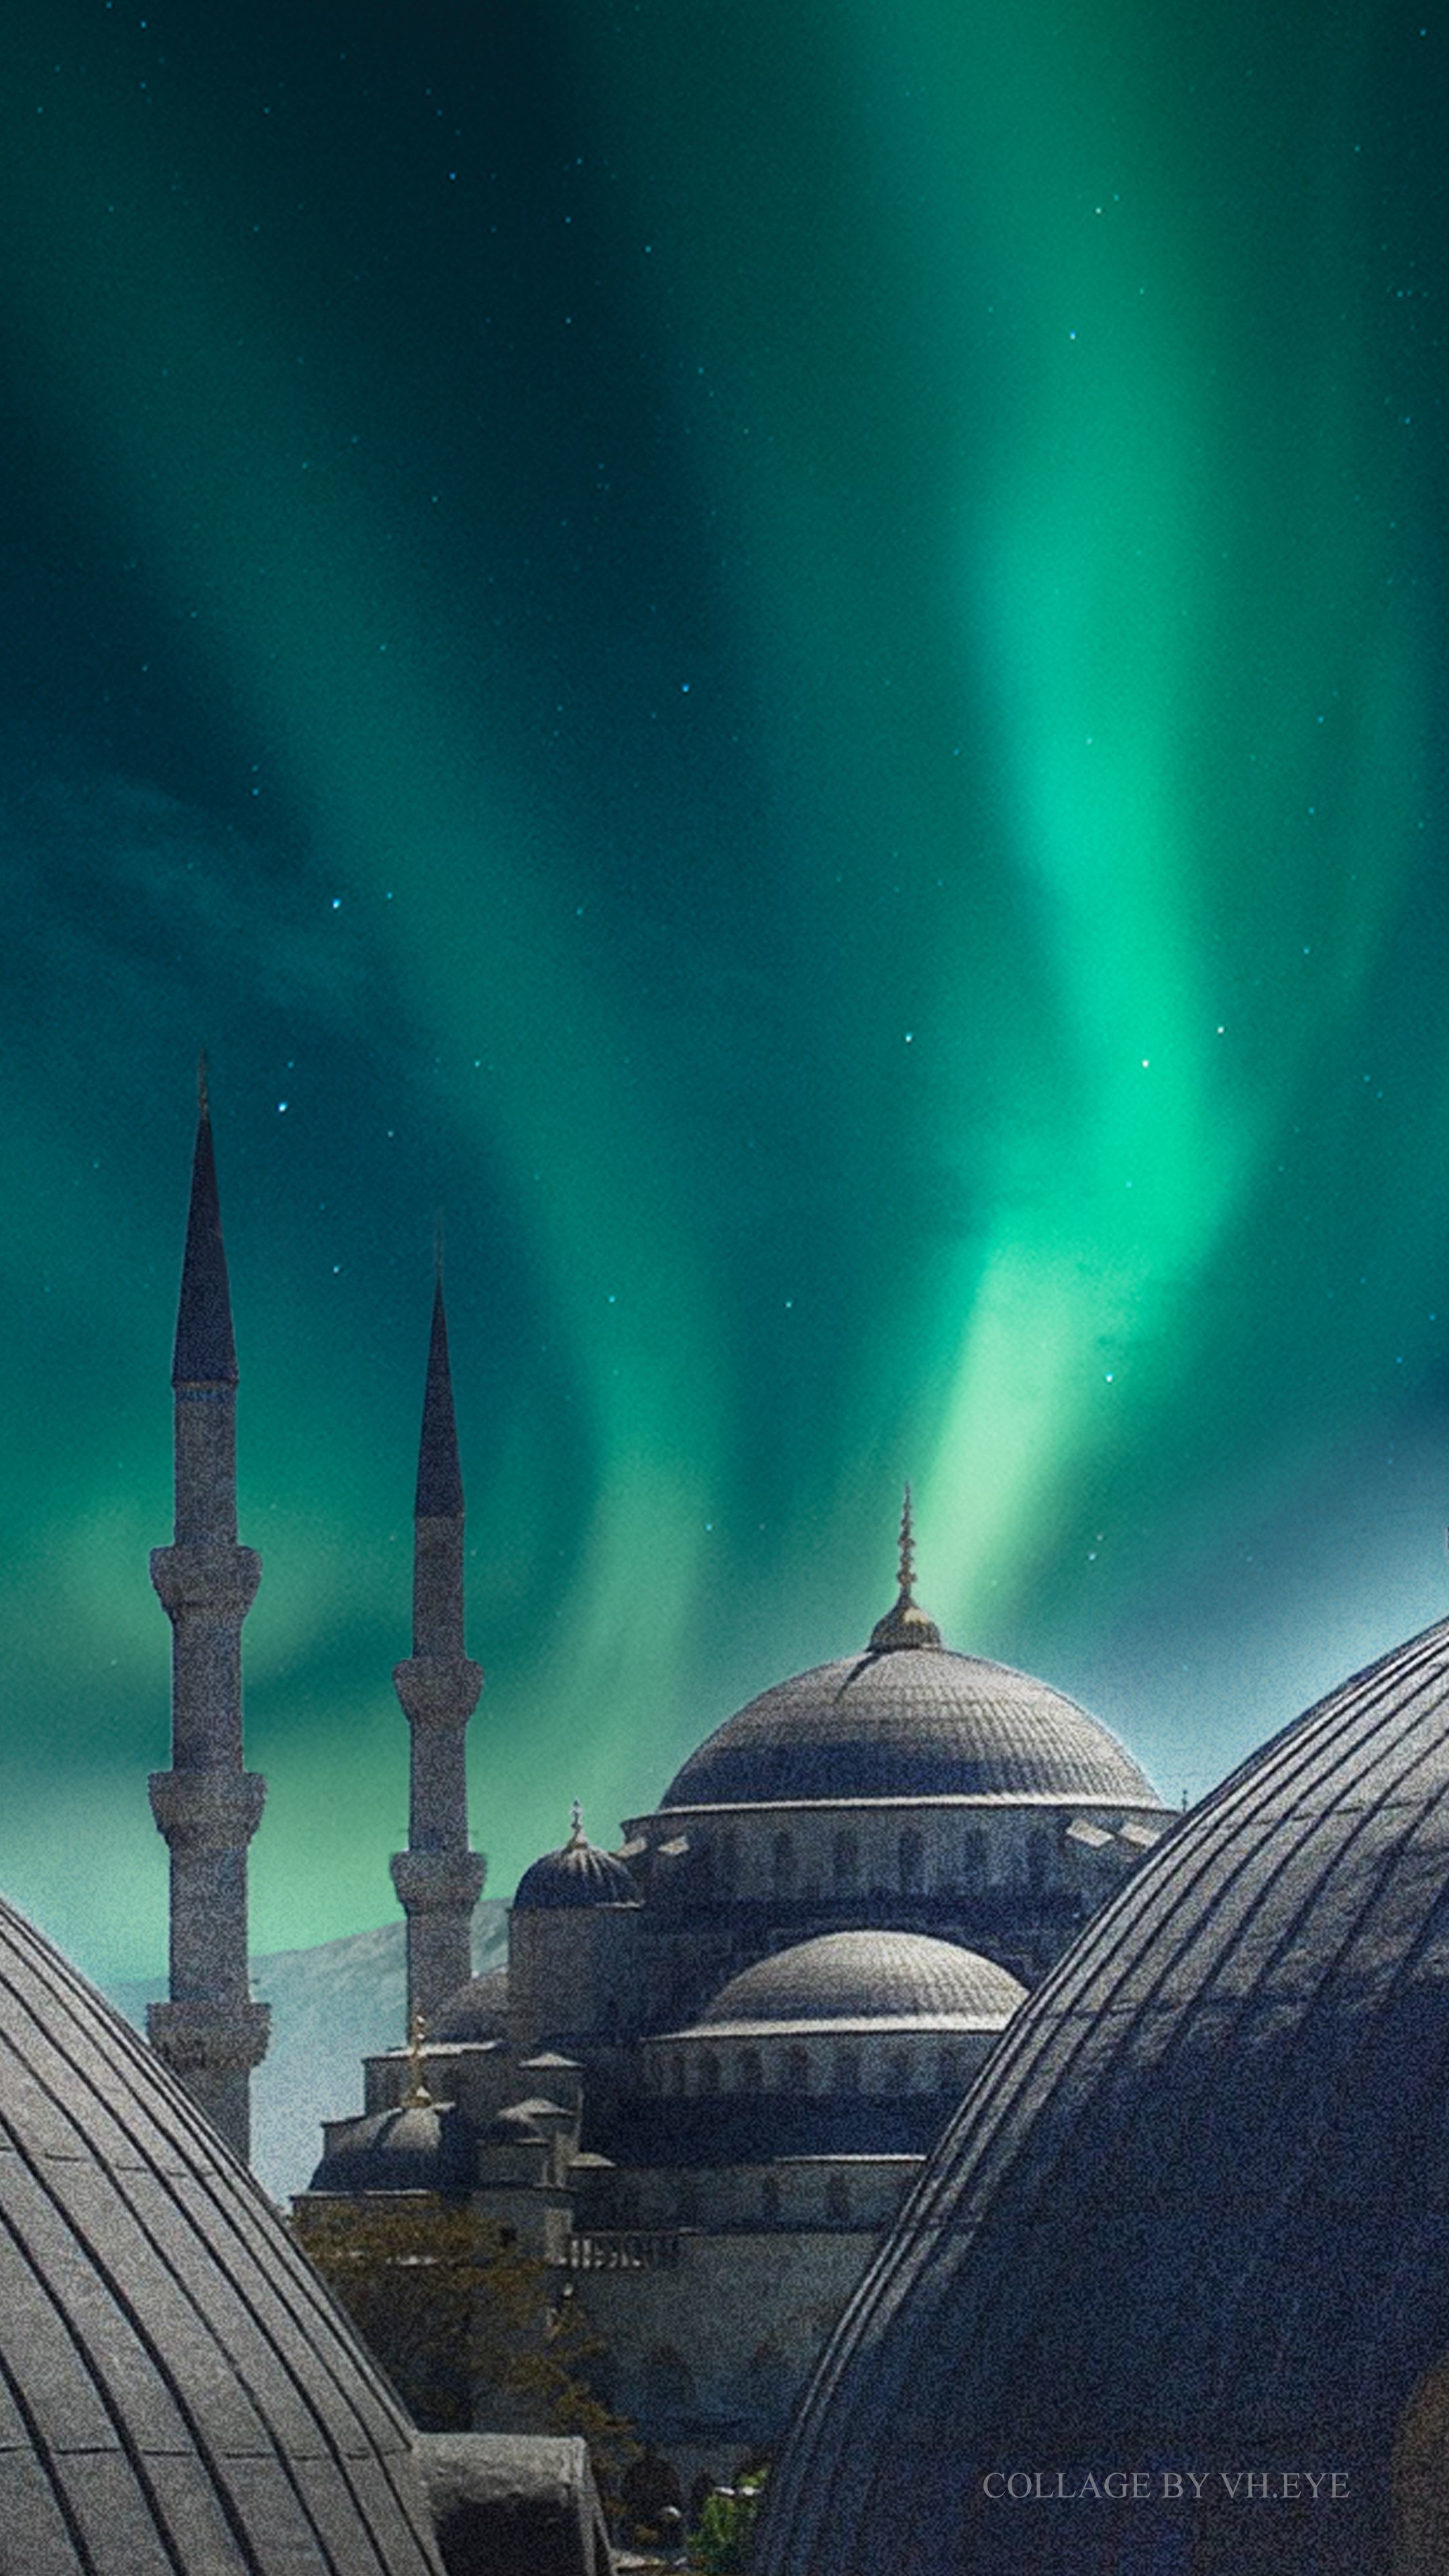 Turkey Blue Mosque Wallpaper Iphone Android Collage Art By Vh Eye Northern Lights Aurora Borealis 2160x3840